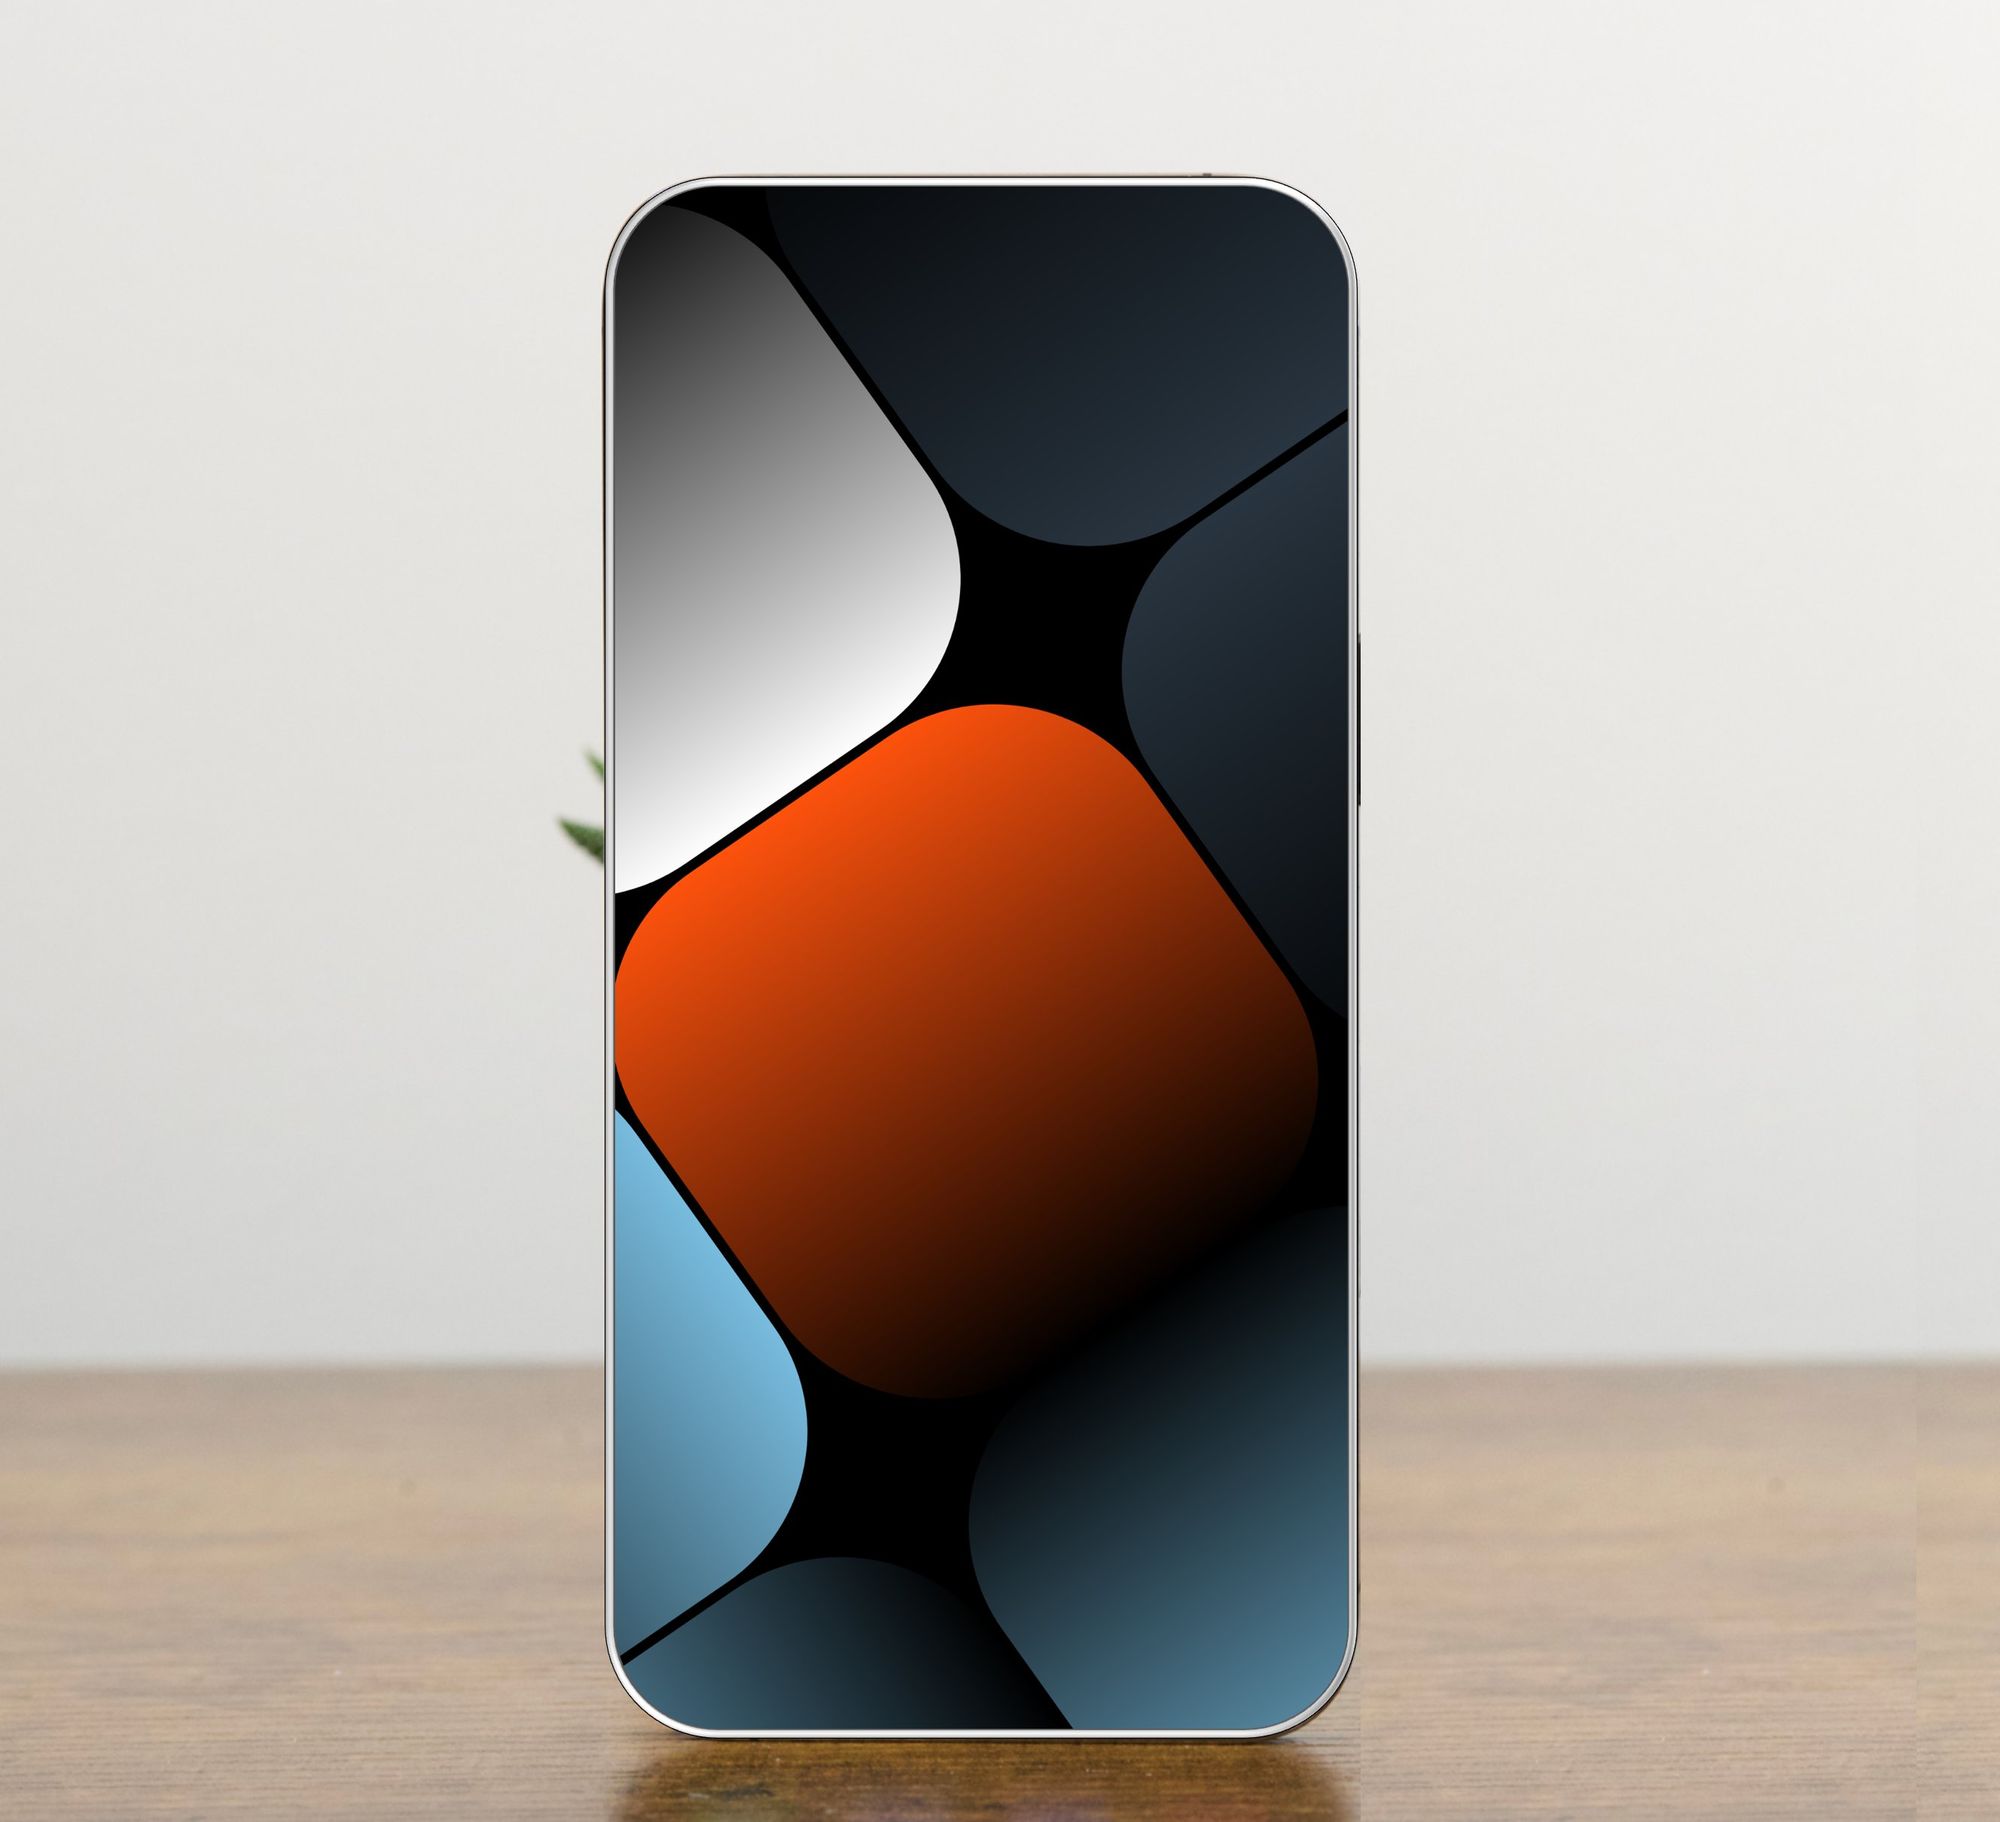 Concept illustration of iPhone 15 Pro with slimmer bezels 